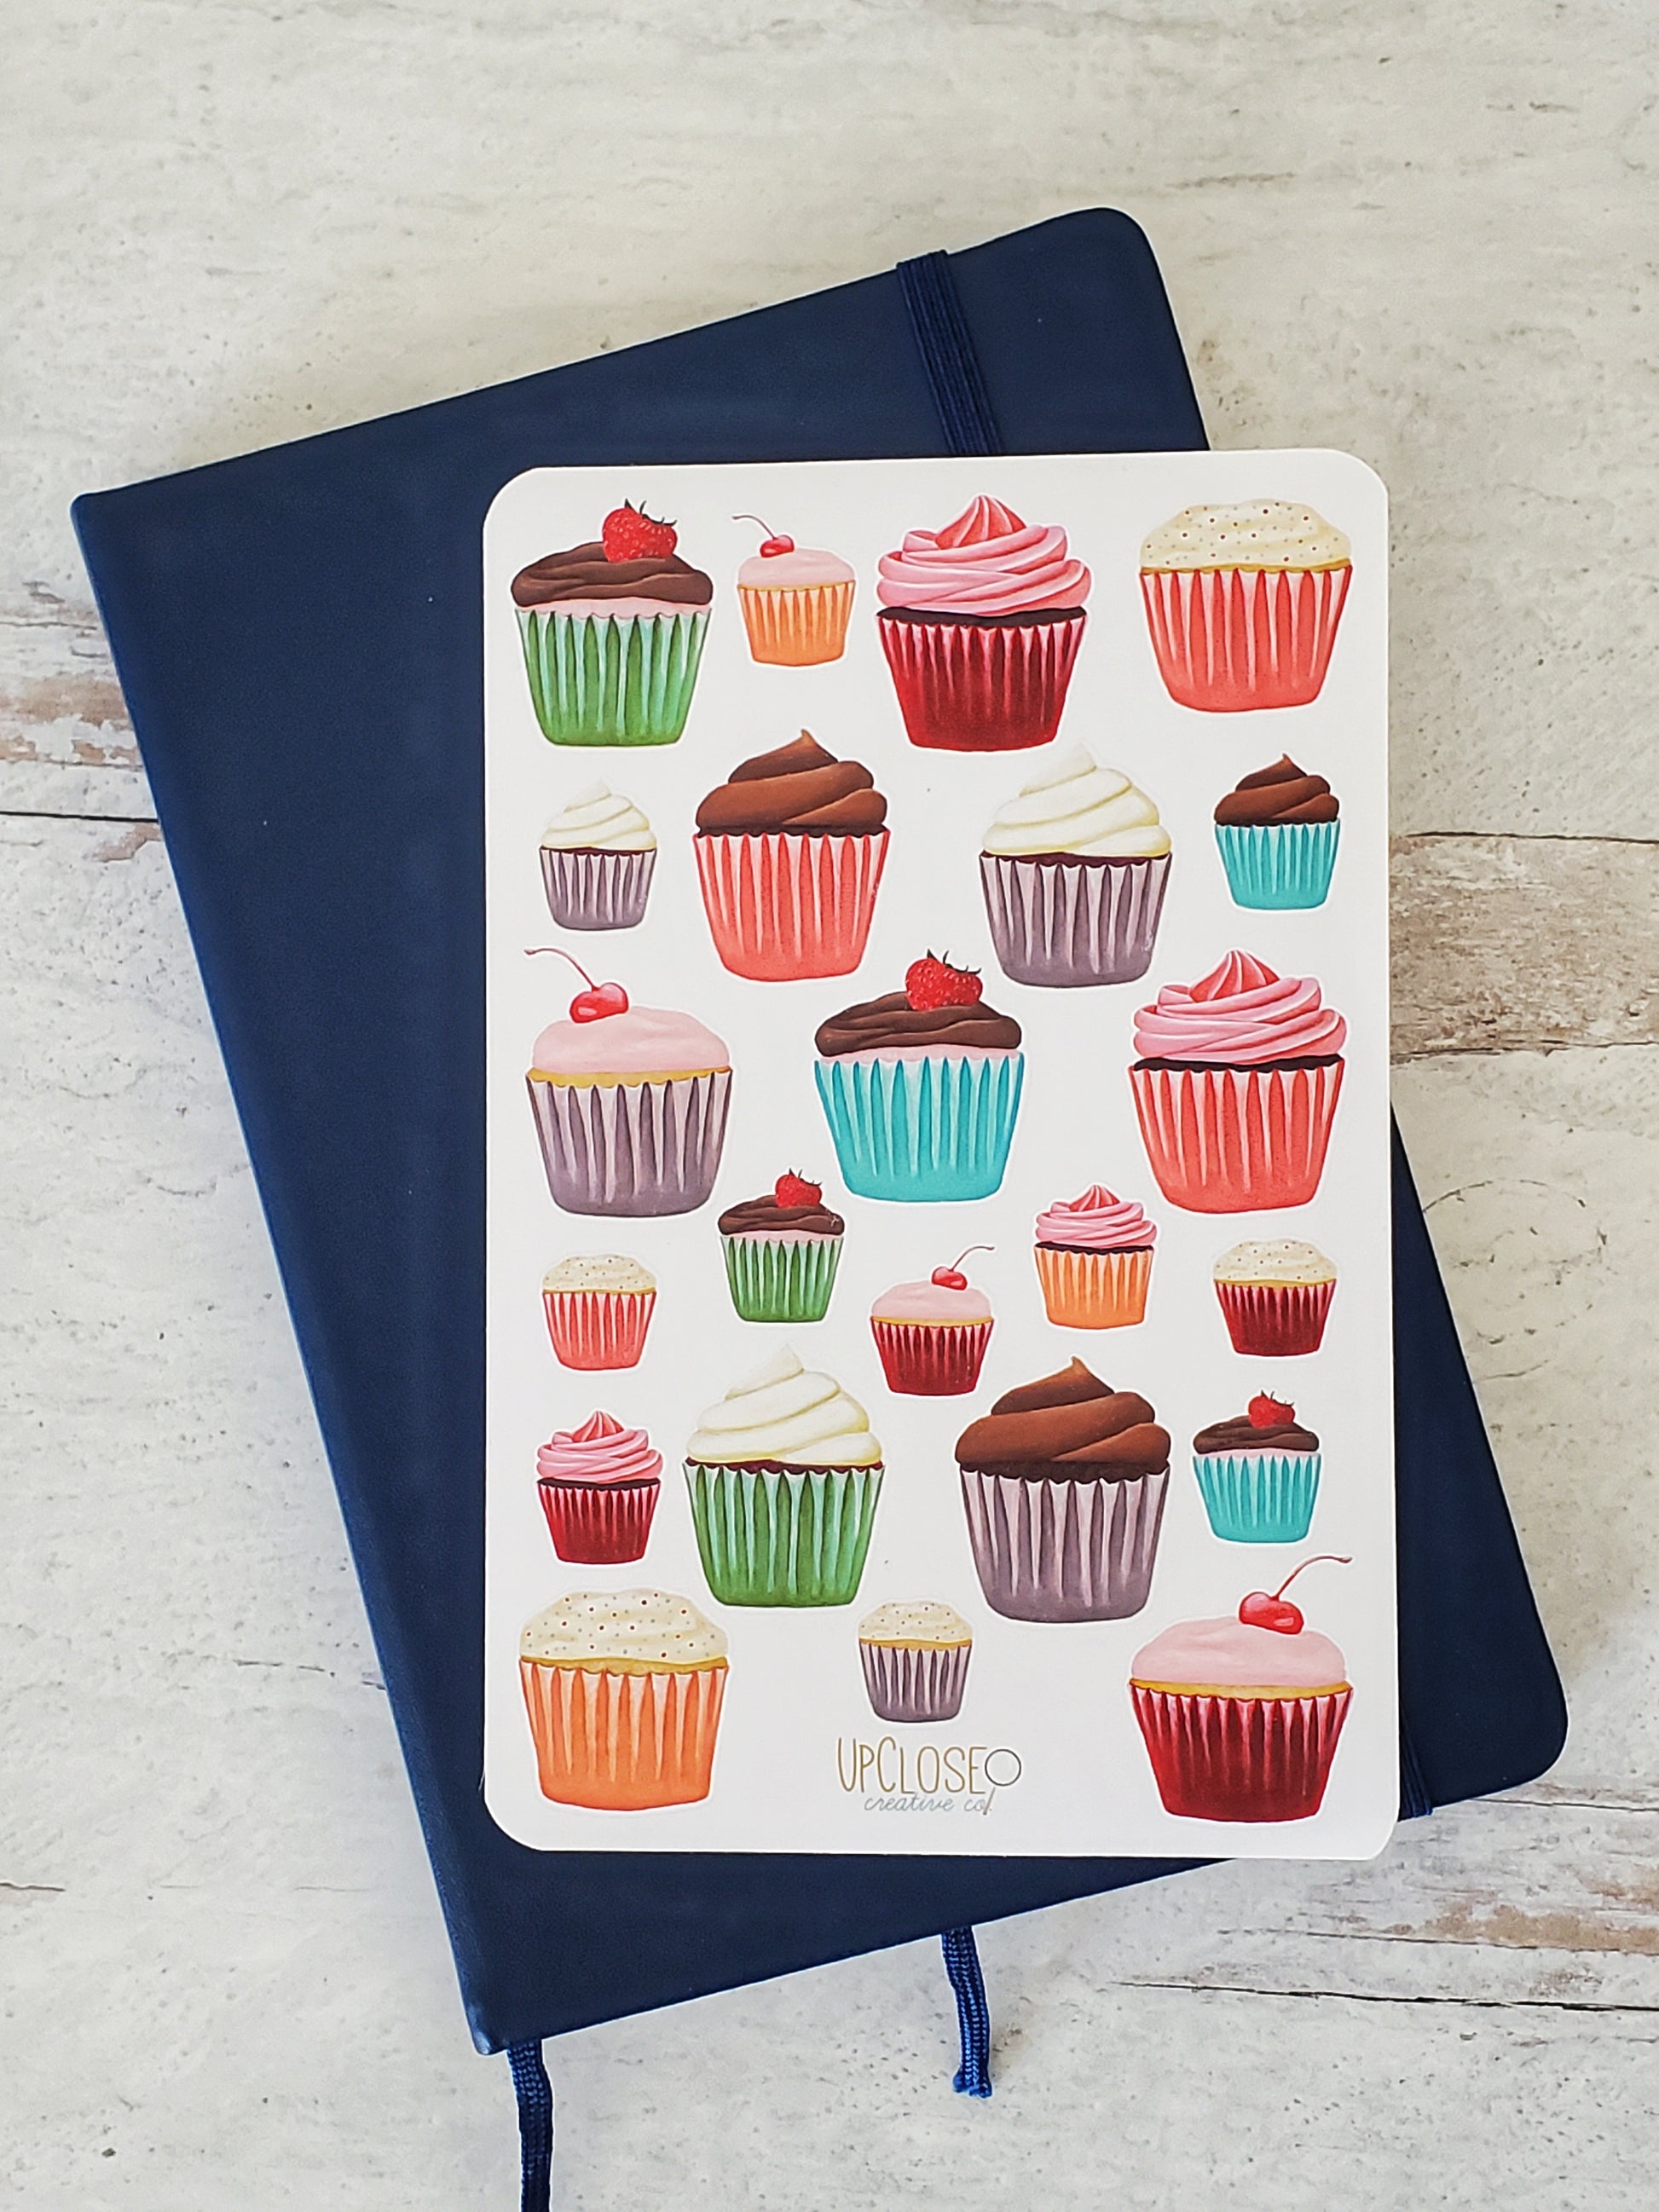 This sticker sheet features a variety of illustrated cupcakes with colorful wrappers, red, purple, orange, green and pink.